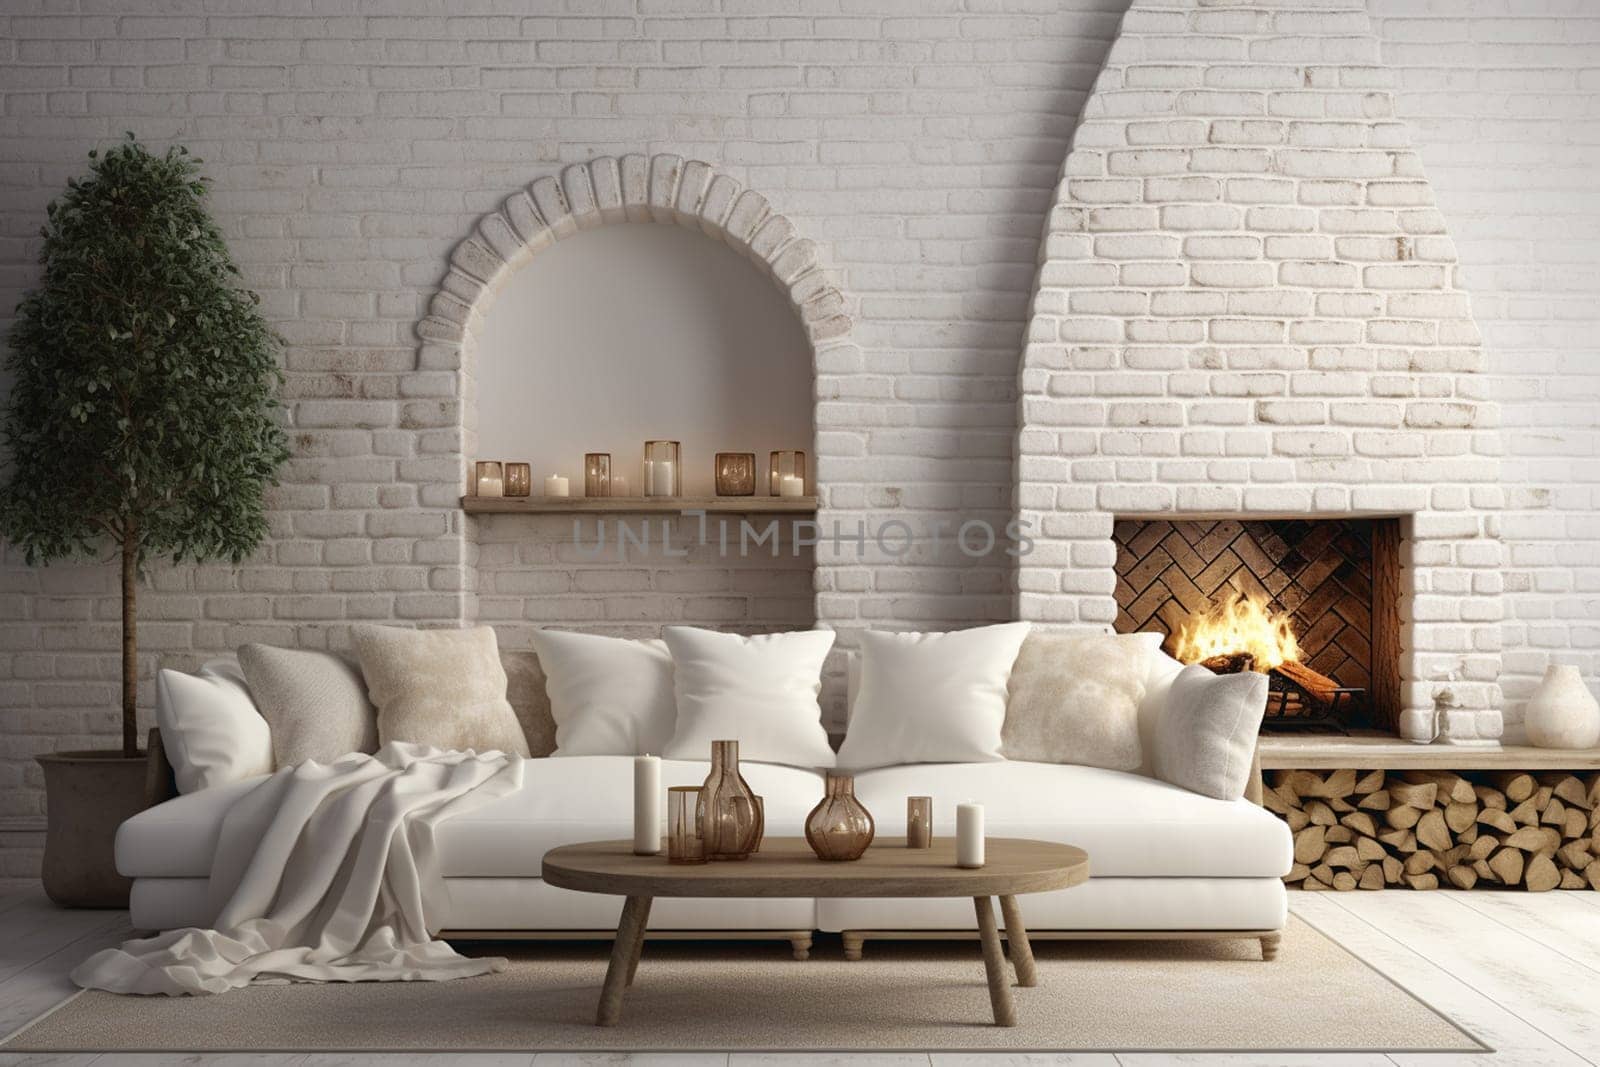 Interior of living room with decorative mantelpiece and sofa. High quality photo